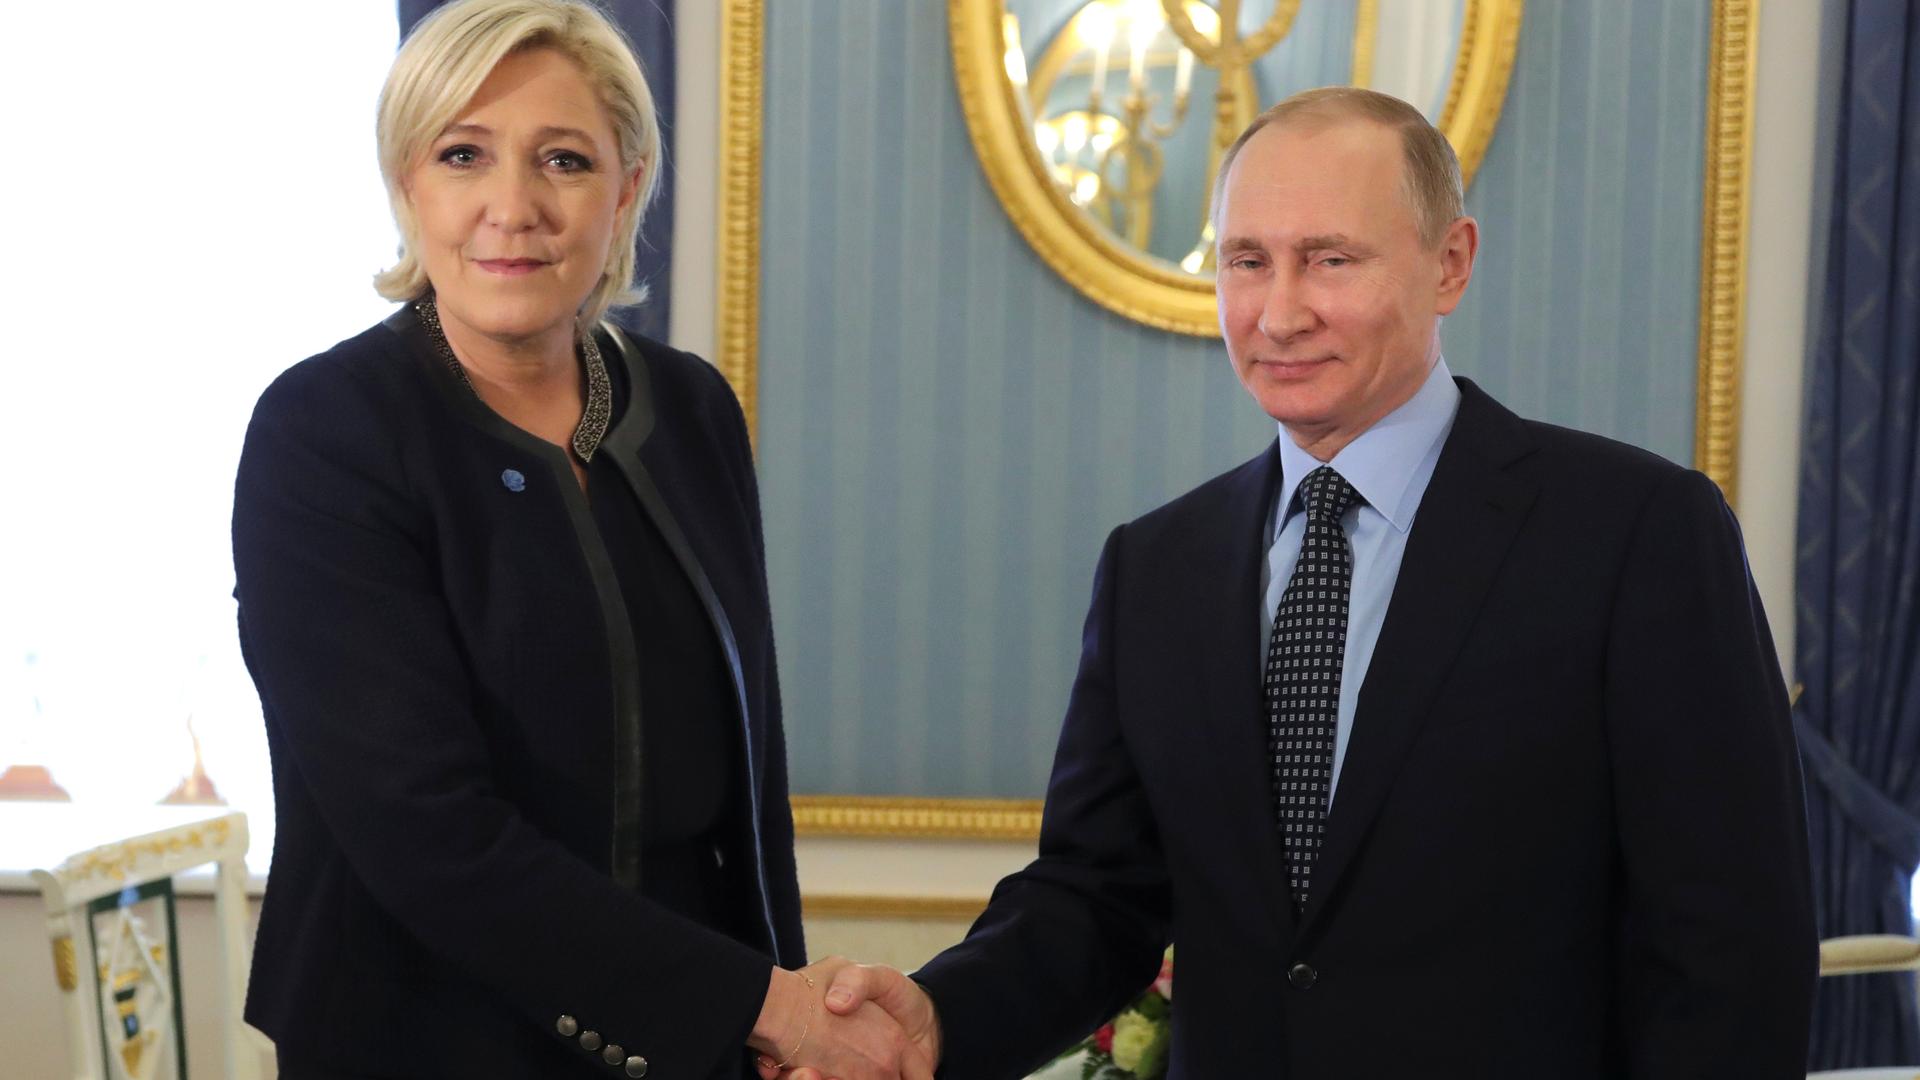 Russian President Vladimir Putin meets with Marine Le Pen, the far right French presidential candidate during a meeting in Moscow, on March 24th 2017. 